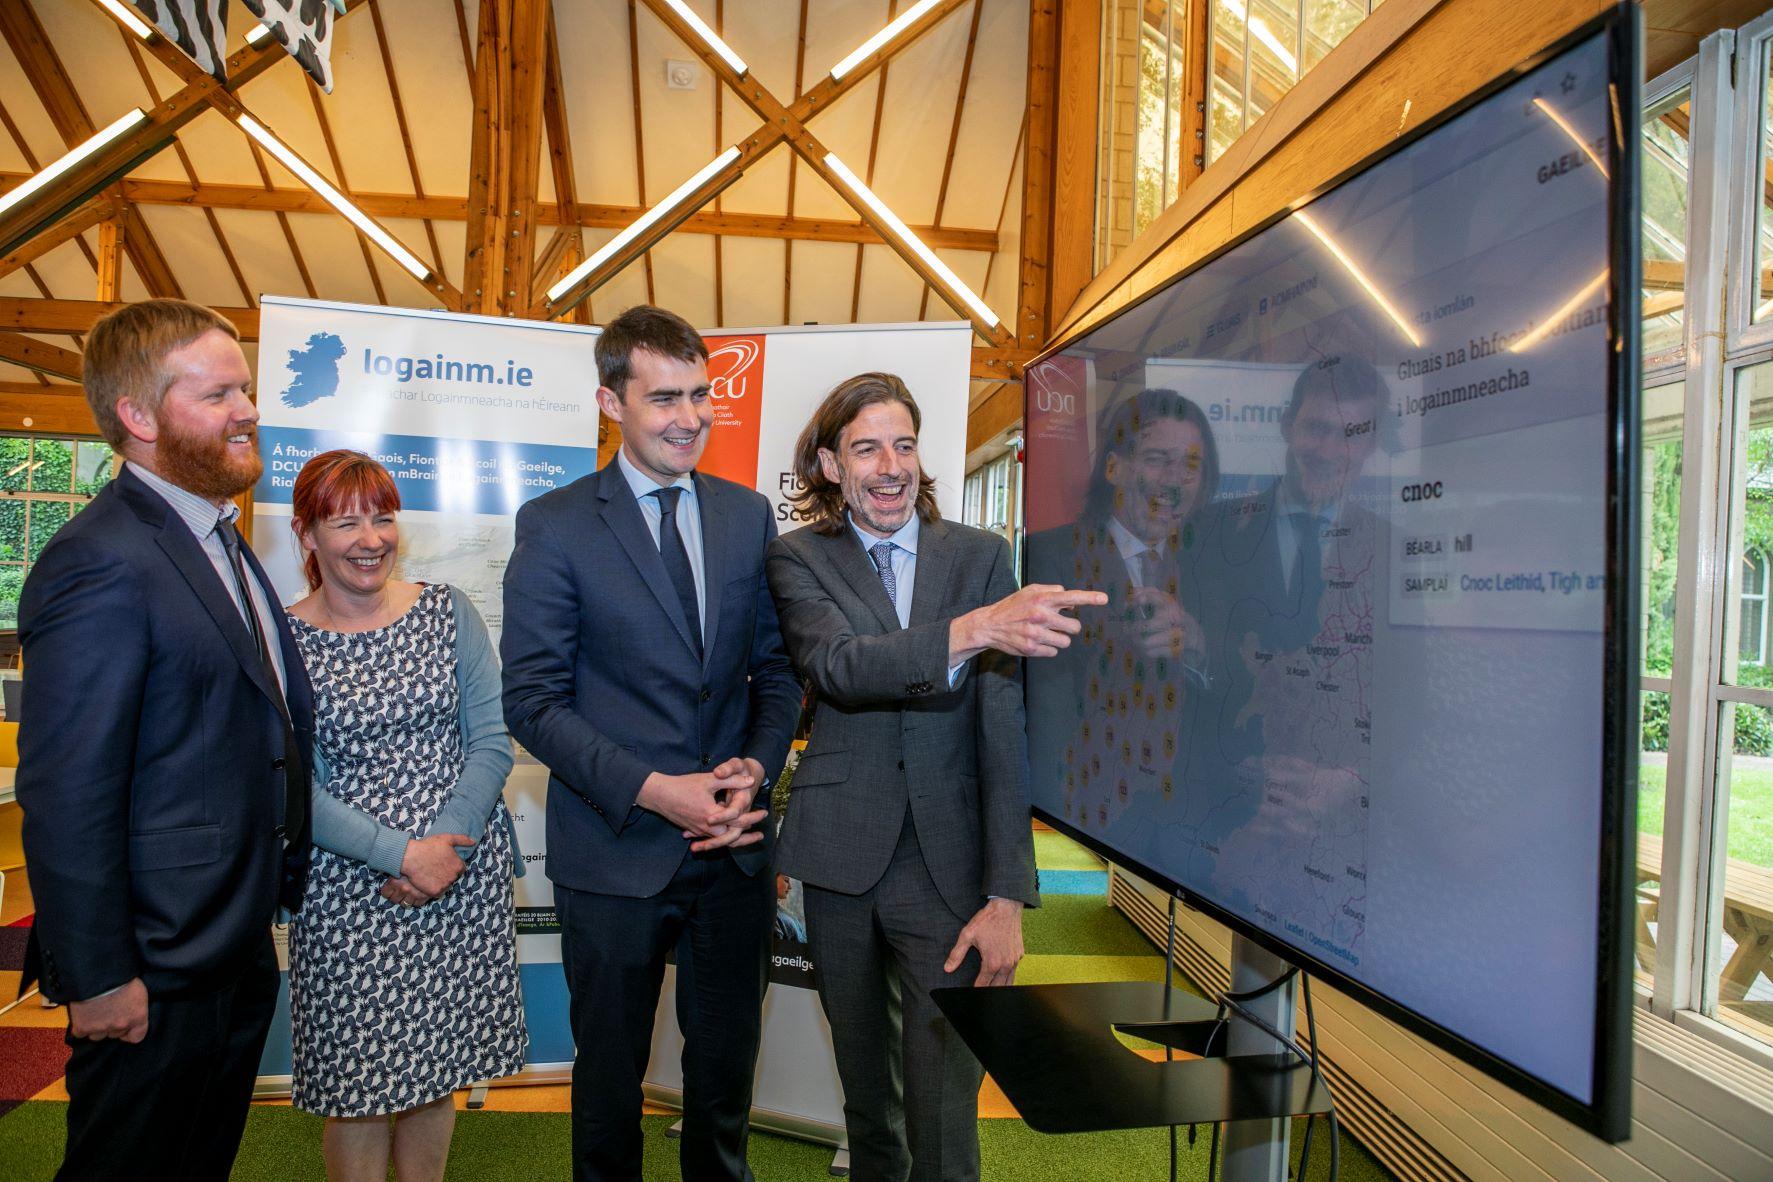 Pictured at the launch of the logainm.ie website in the Restaurant in DCU All Hallows were from left Brian O’Raghaillaigh ,DCU with Una Breathnach ,Manager,Deputy Jack Chambers TD ,Minister of State for Gaeltacht Affairs and Sport and Ciaran Macan Bhaird ,Head of School ,DCU.